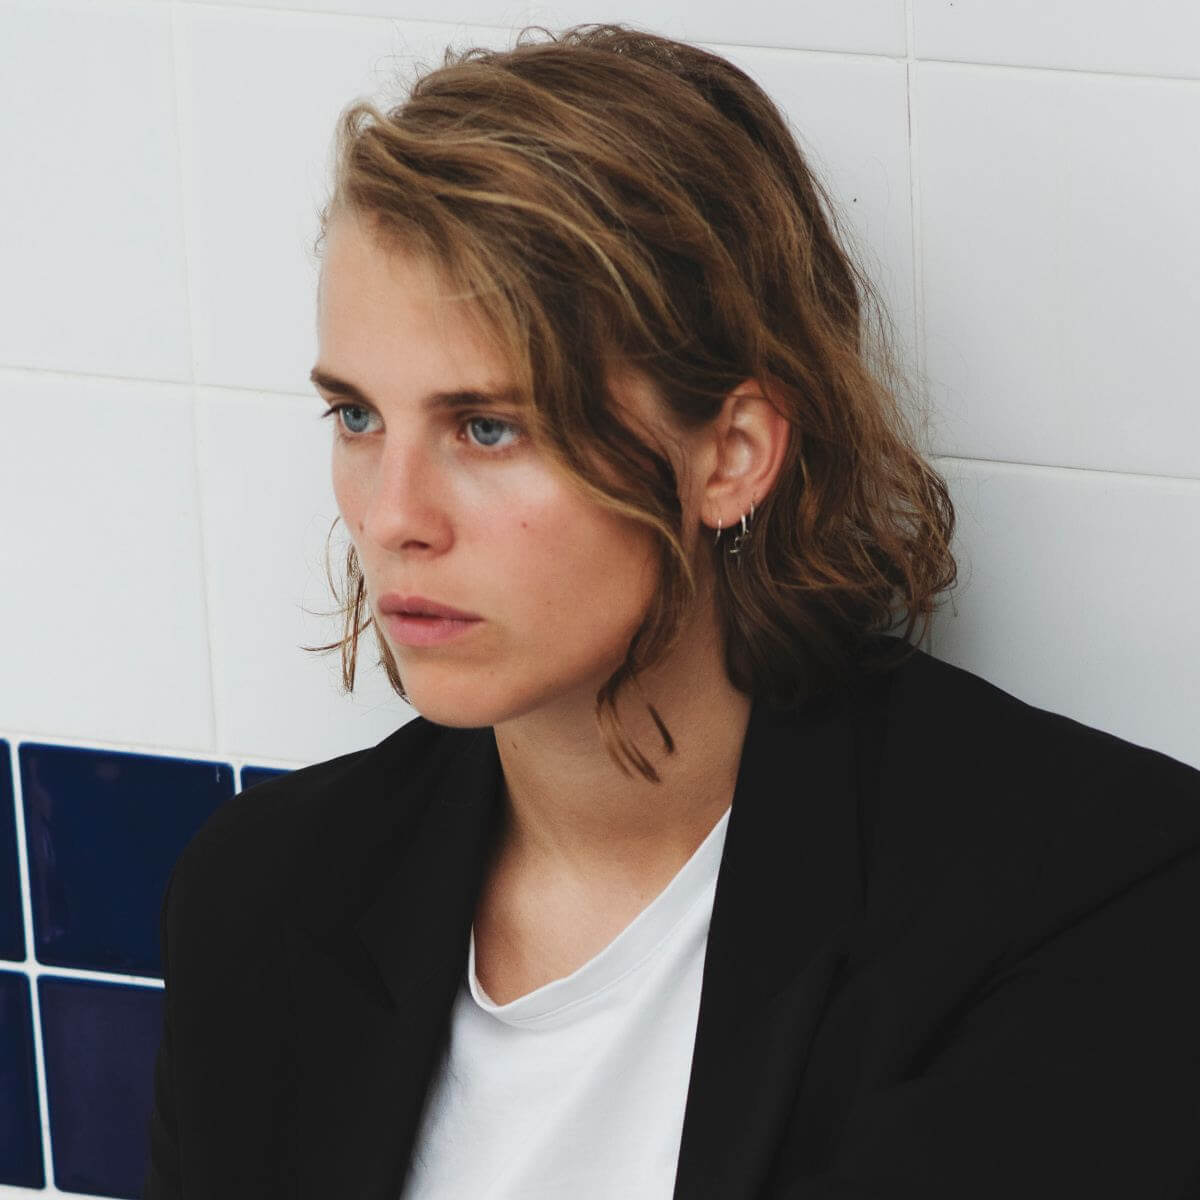 “Between the Bars" by Marika Hackman (Elliott Smith cover) is Northern Transmissions Song of the Day, now available via Sub Pop/Transgressive